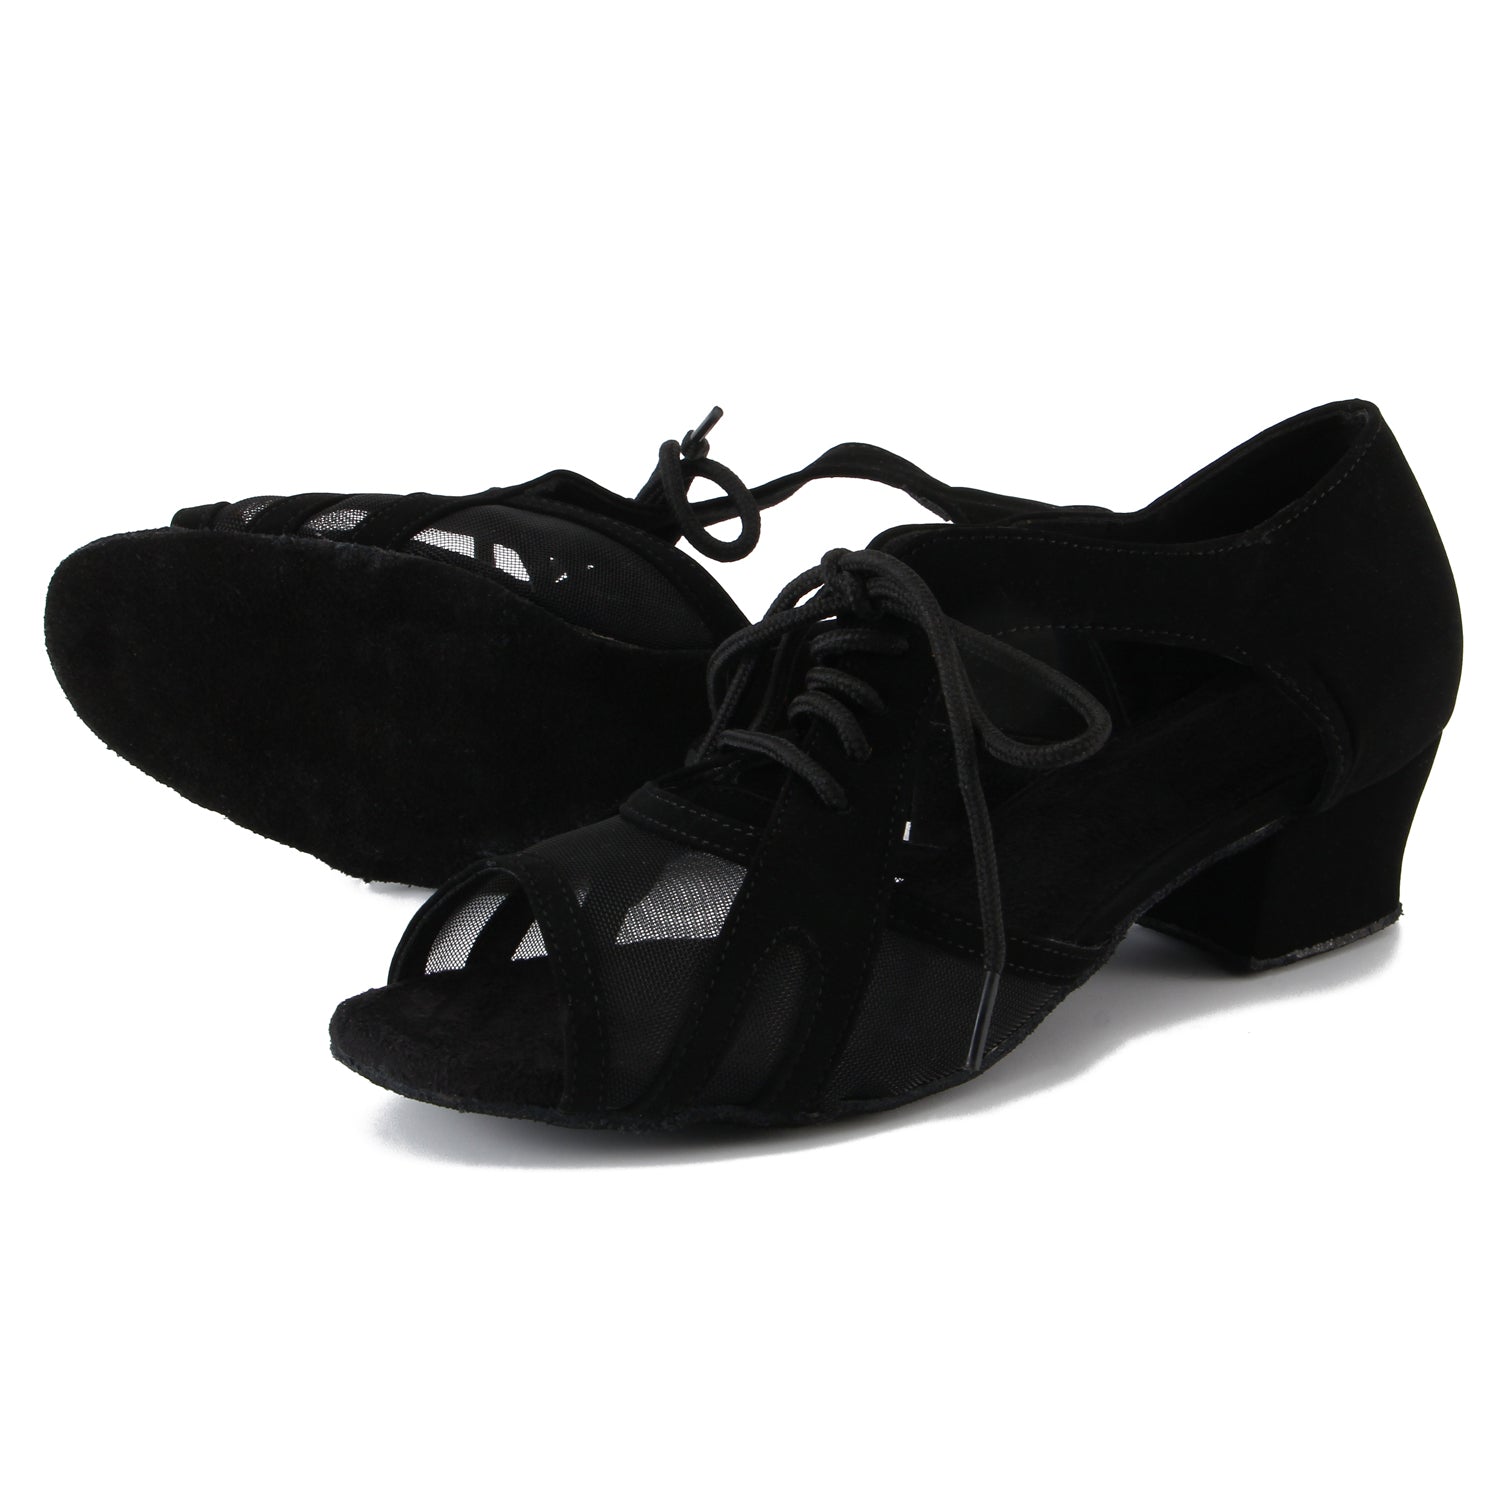 Women Ballroom Dancing Shoes with Suede Sole, Lace-up Open-toe Design in Black for Tango Latin Practice - PD-3002A7